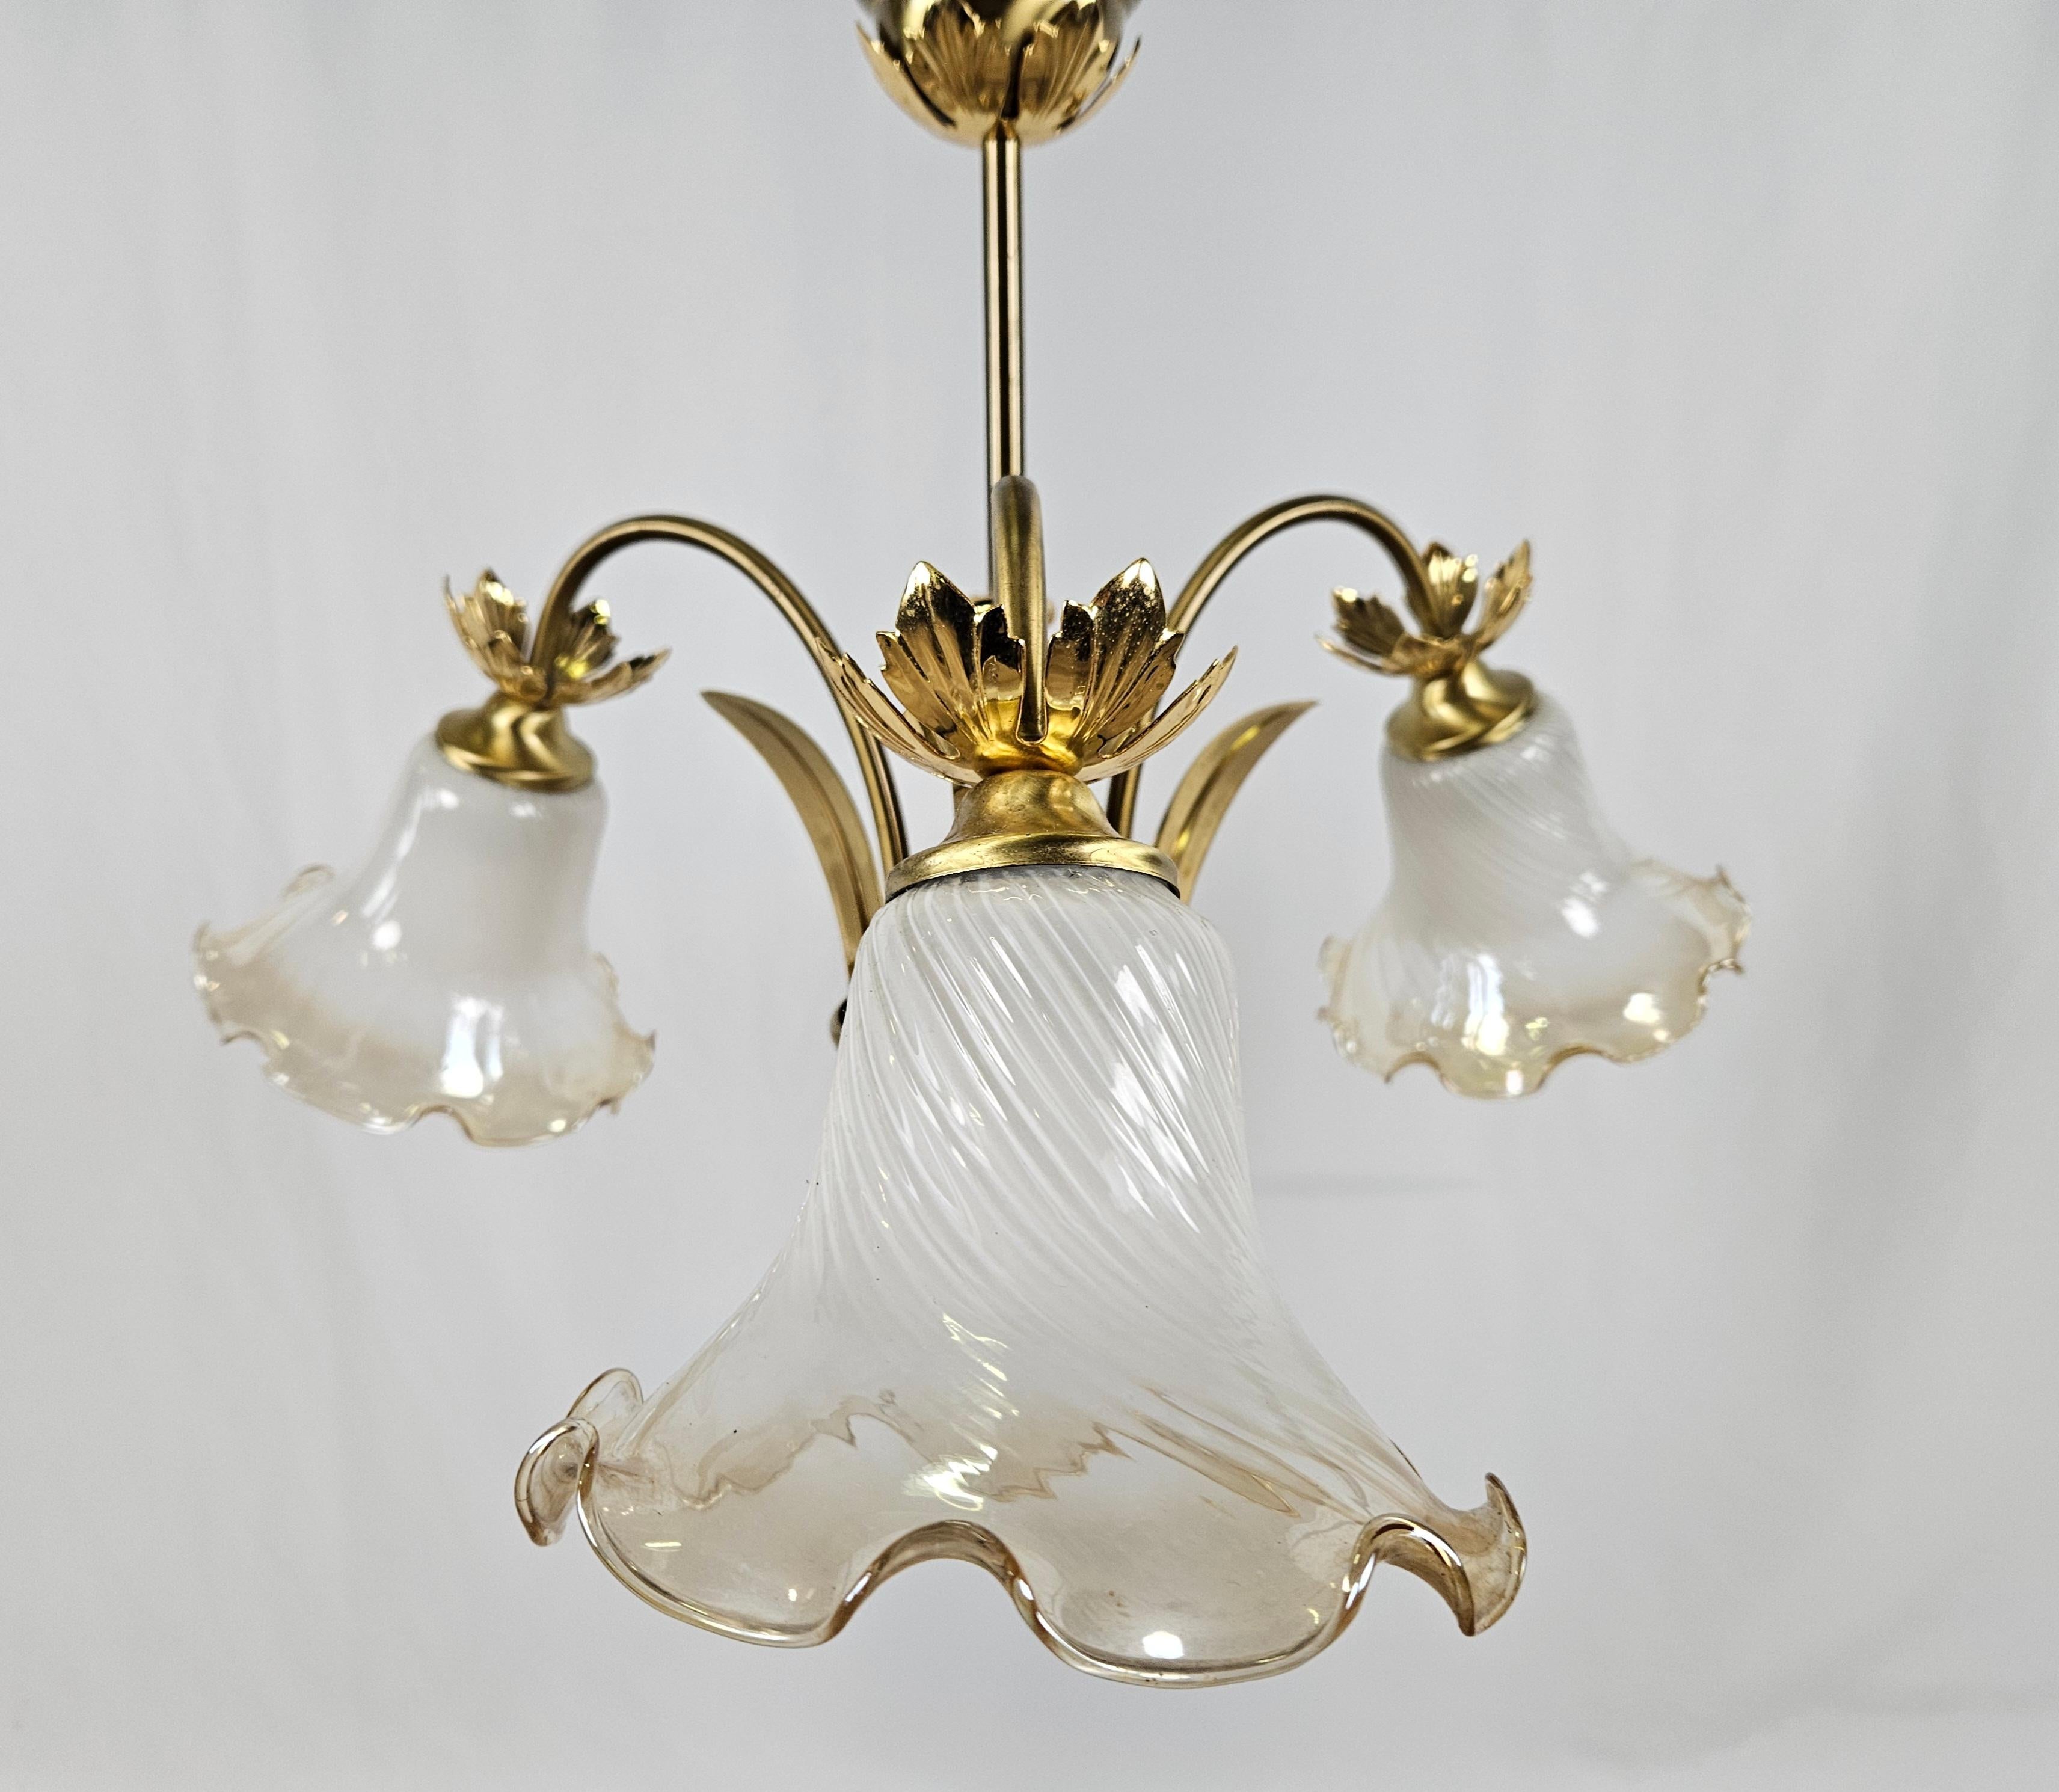 1970s ceiling chandelier designed and planned reminiscent of Art Nouveau and Art Nouveau style, ideal for rooms with antique or modern decor.

It has three light points with machined glass ceiling lights, also features several brass structural